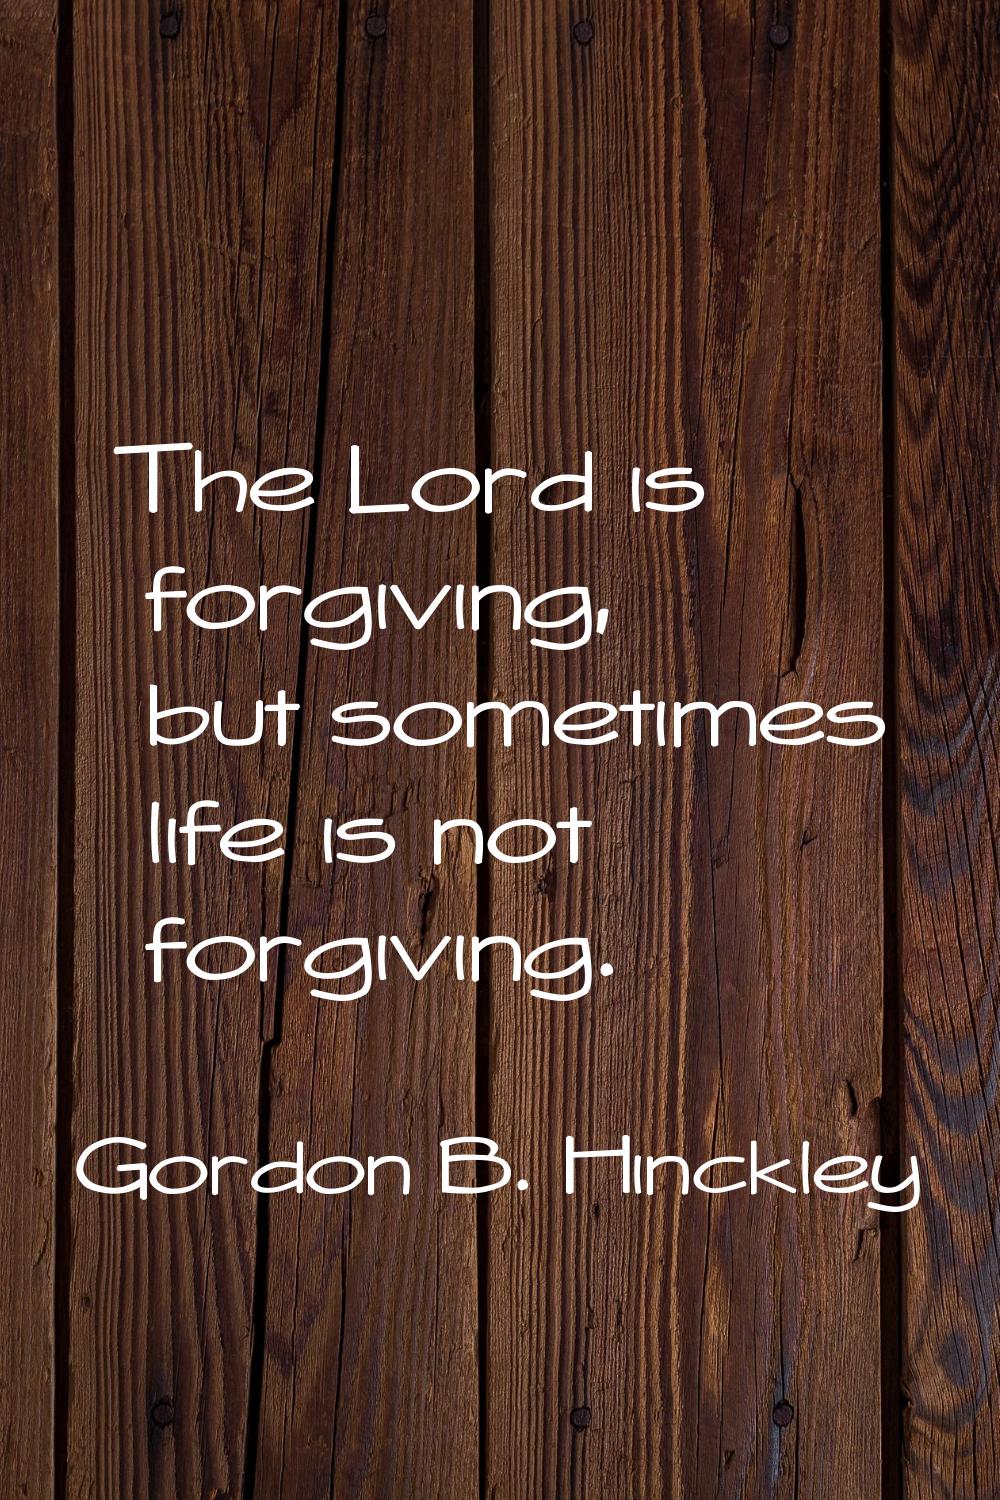 The Lord is forgiving, but sometimes life is not forgiving.